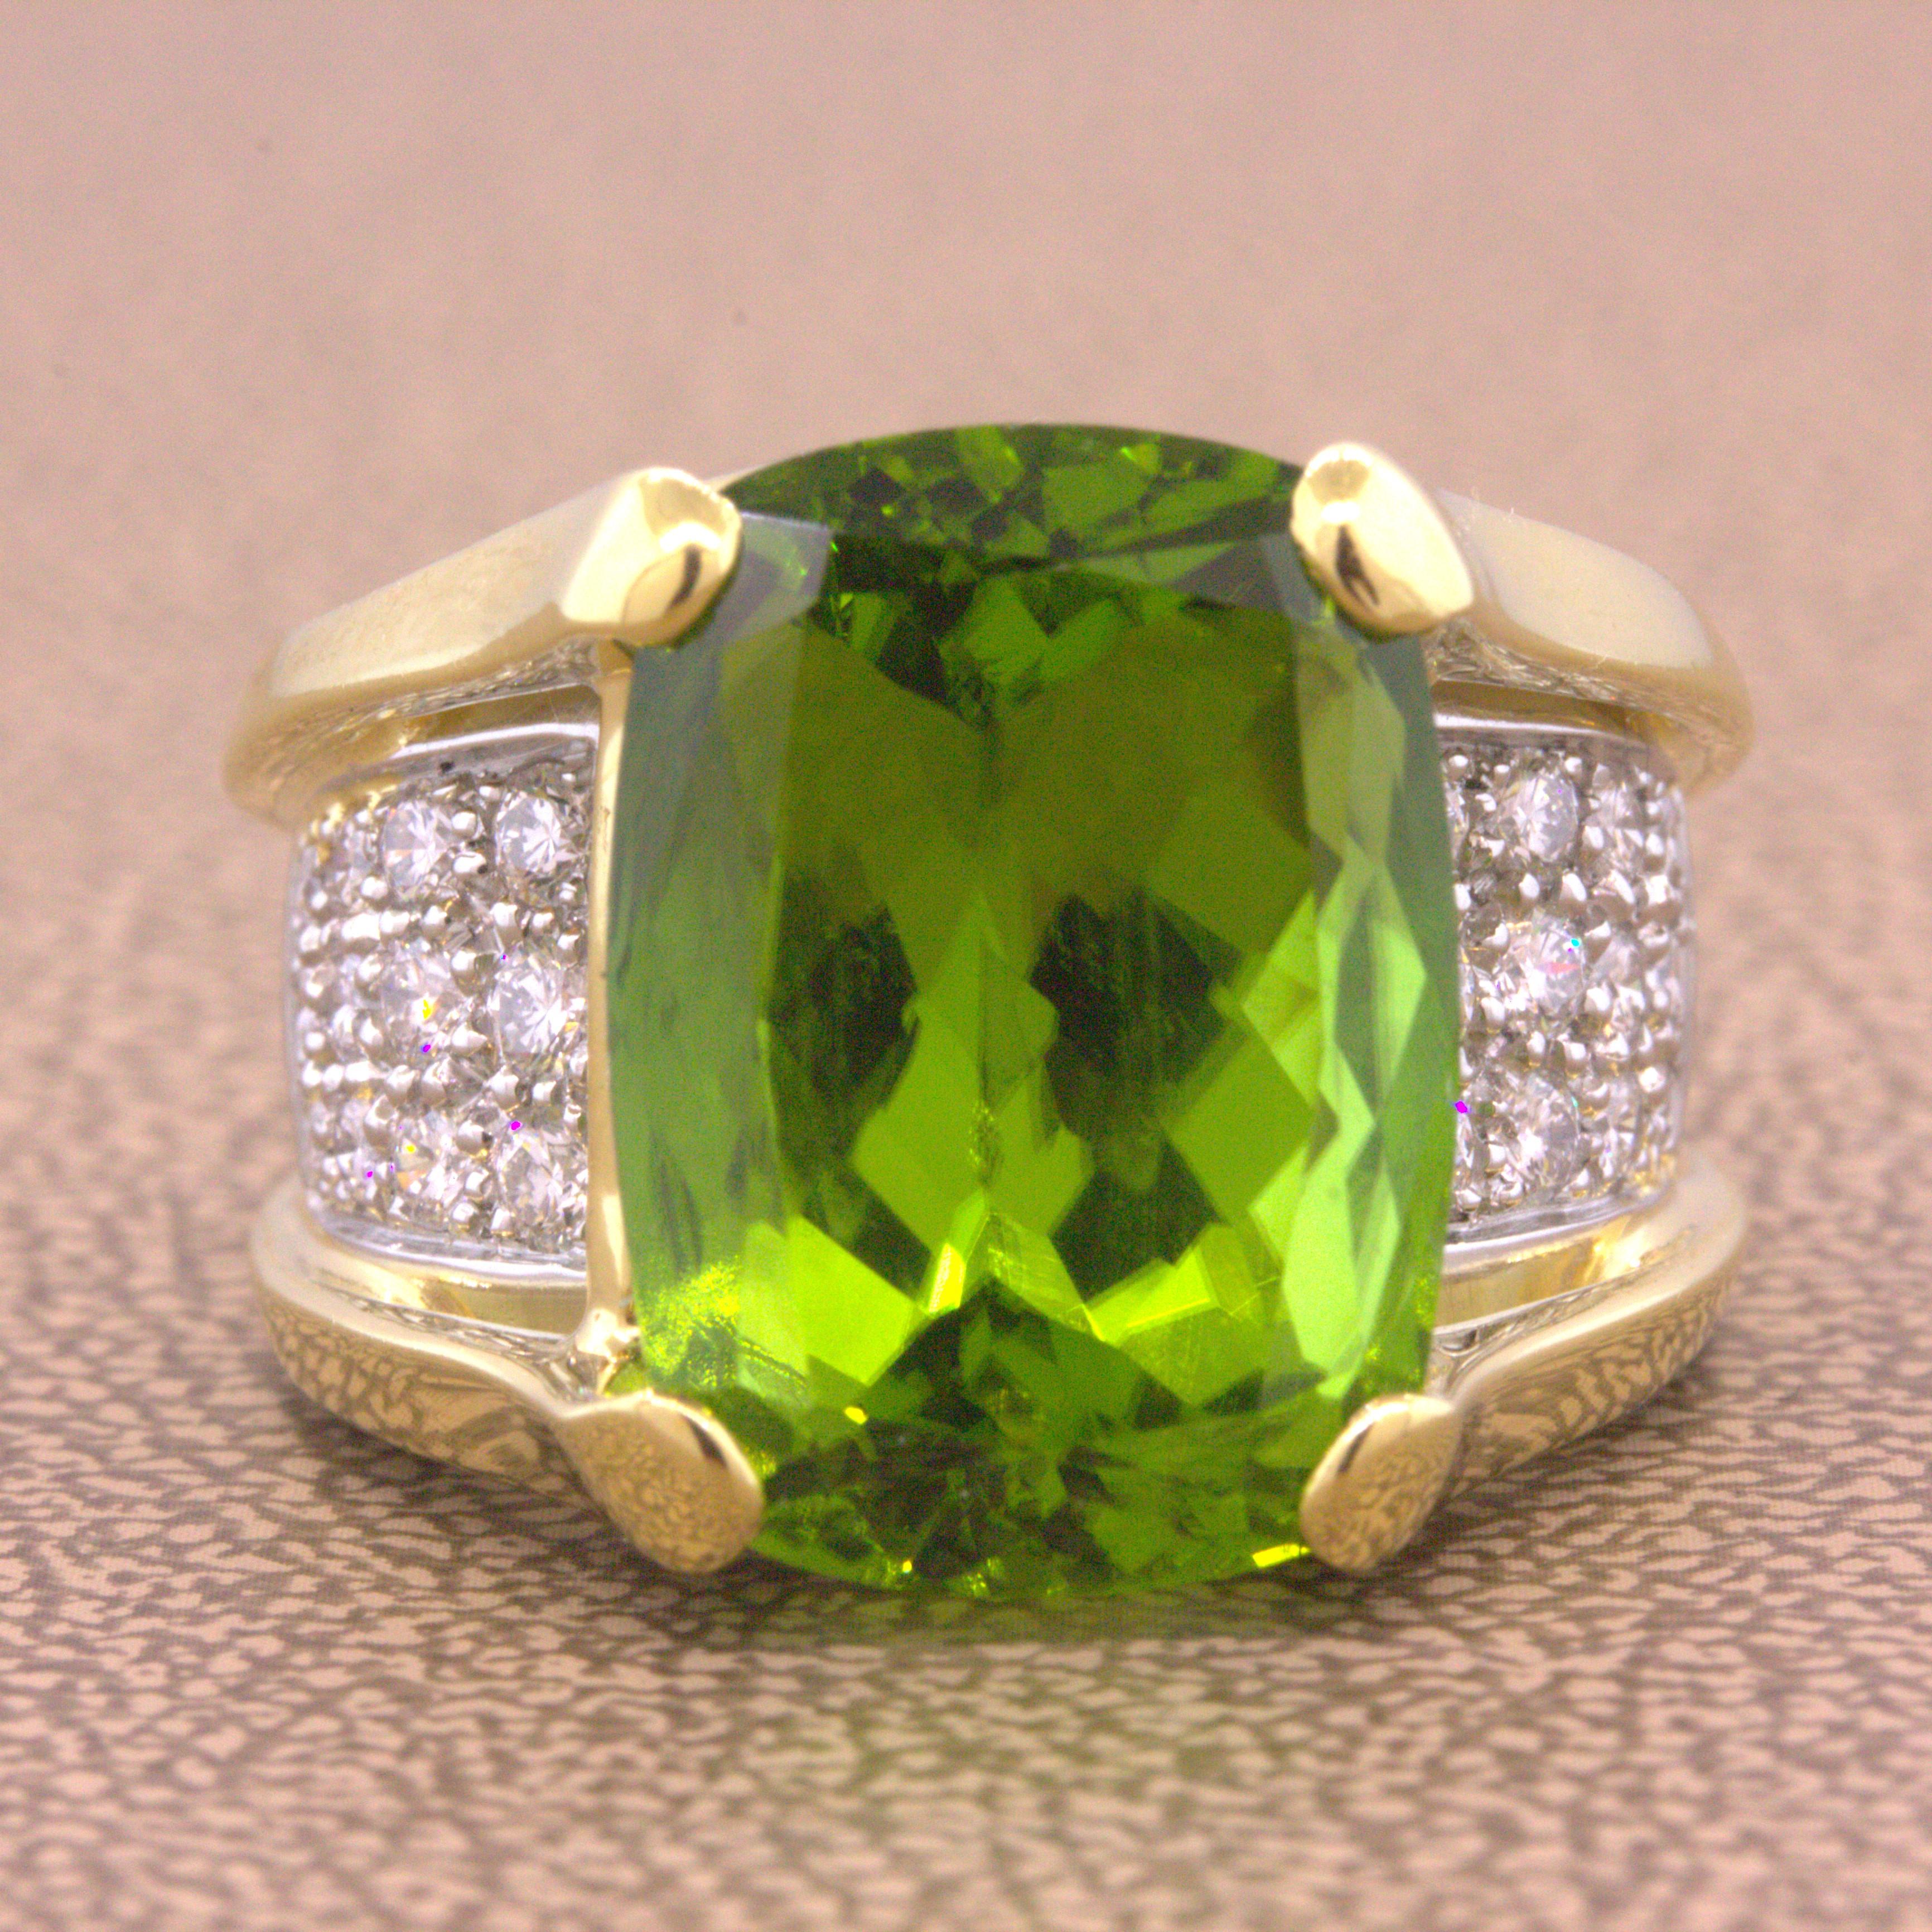 A beautiful ring featuring a large and impressive peridot weighing 11.99 carats which has a rich and vibrant green color. It is complemented by 0.61 carats of round brilliant-cut diamonds which add brilliance and sparkle to the statement piece. Made